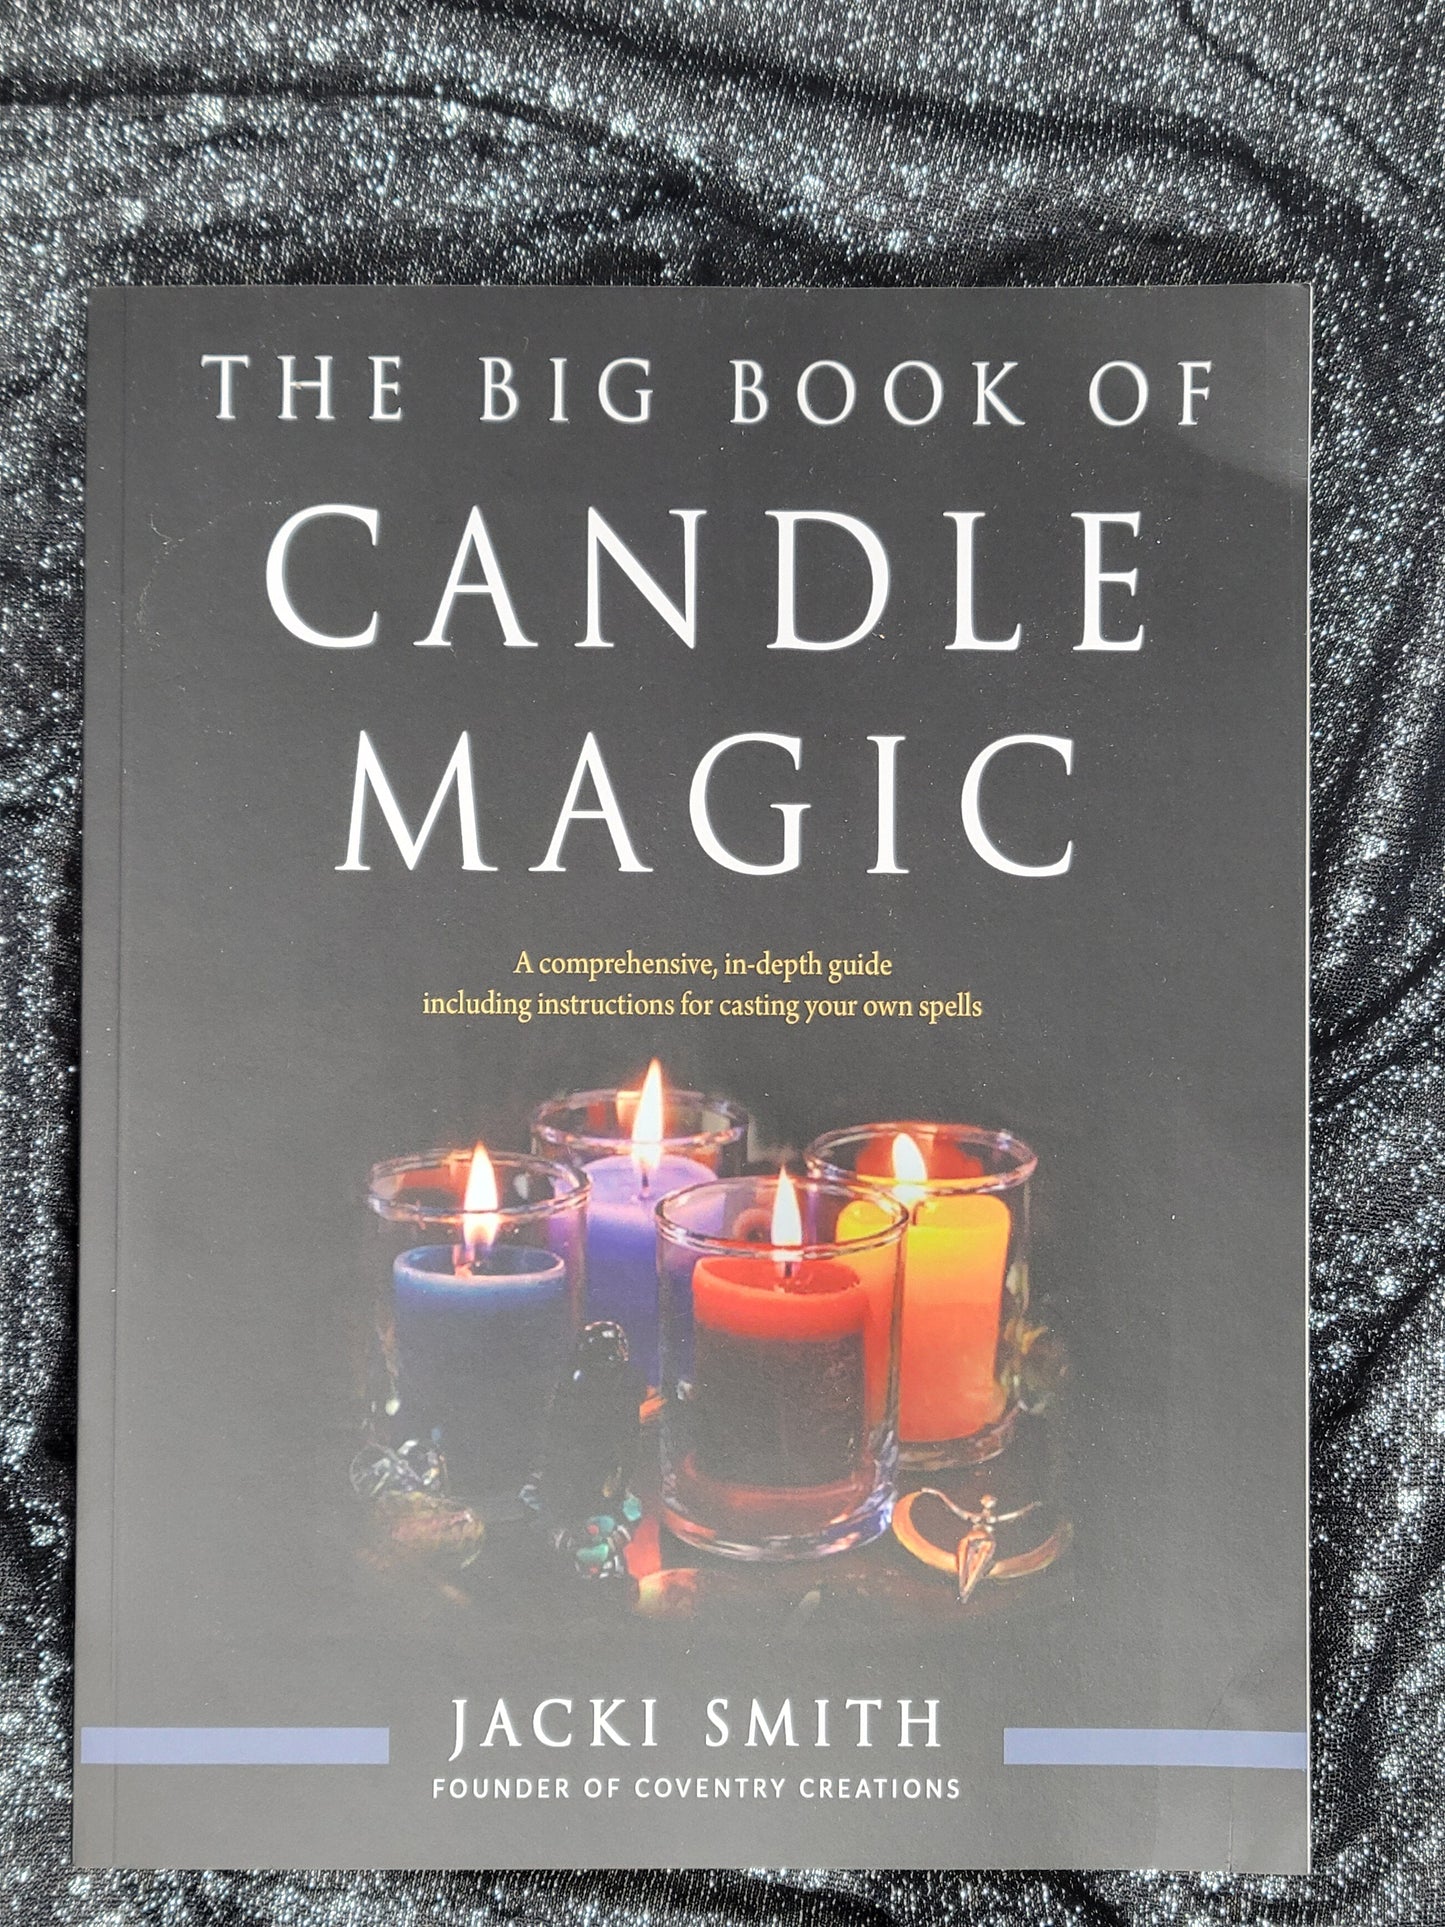 The Big Book of Candle Magic by Jacki Smith (Founder of Coventry Creations)